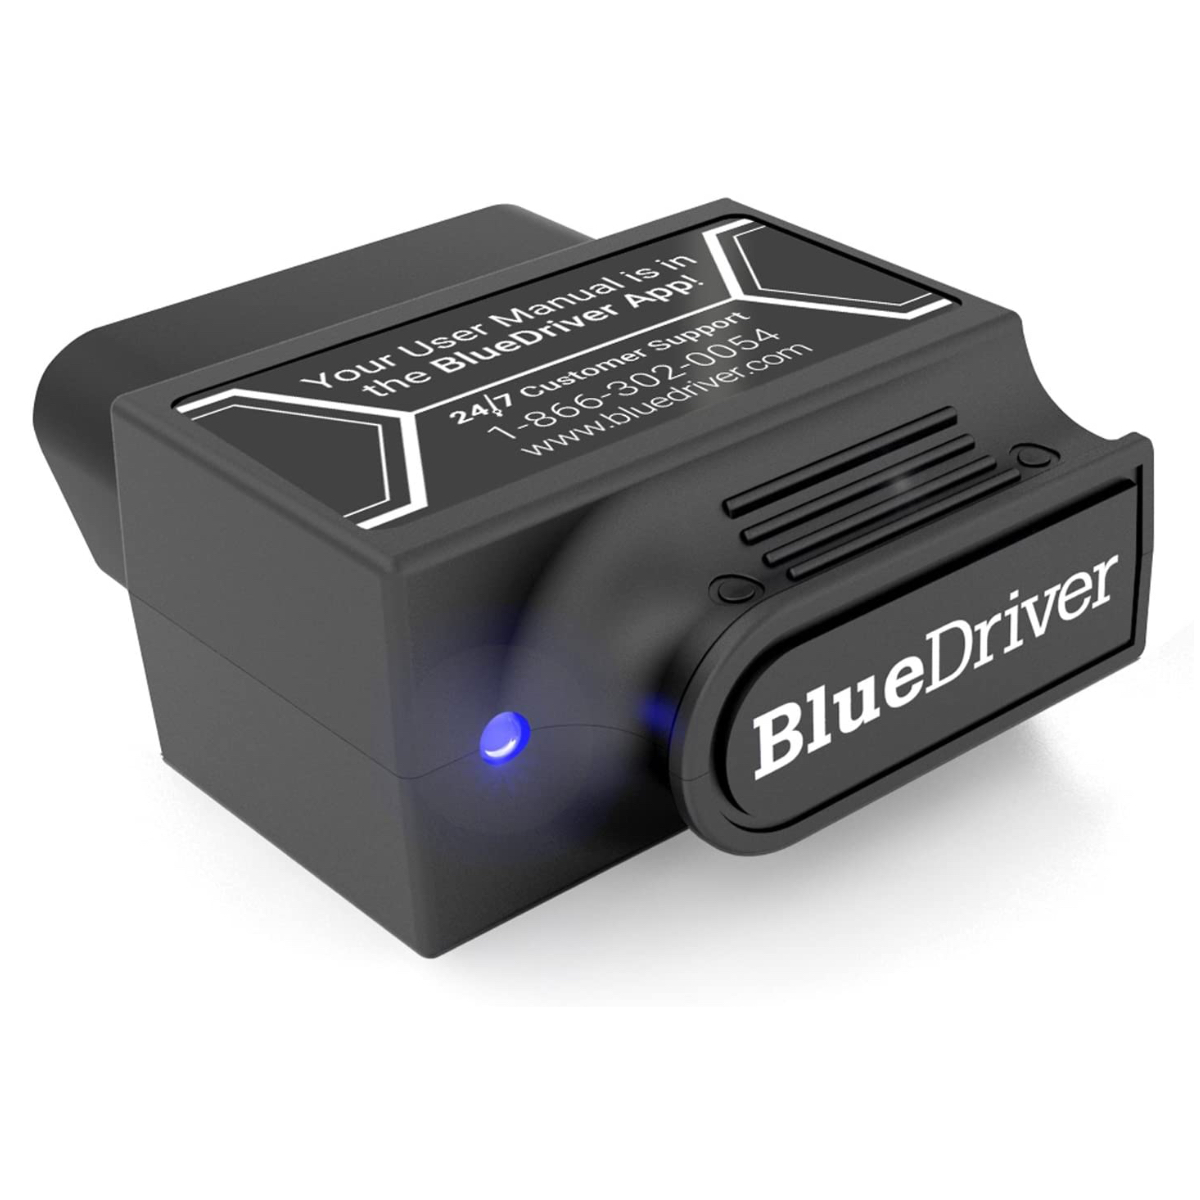 BlueDriver Pro OBD2 Bluetooth Car Diagnostic Scan Tool and Code Reader for iPhone and Android - image 1 of 5